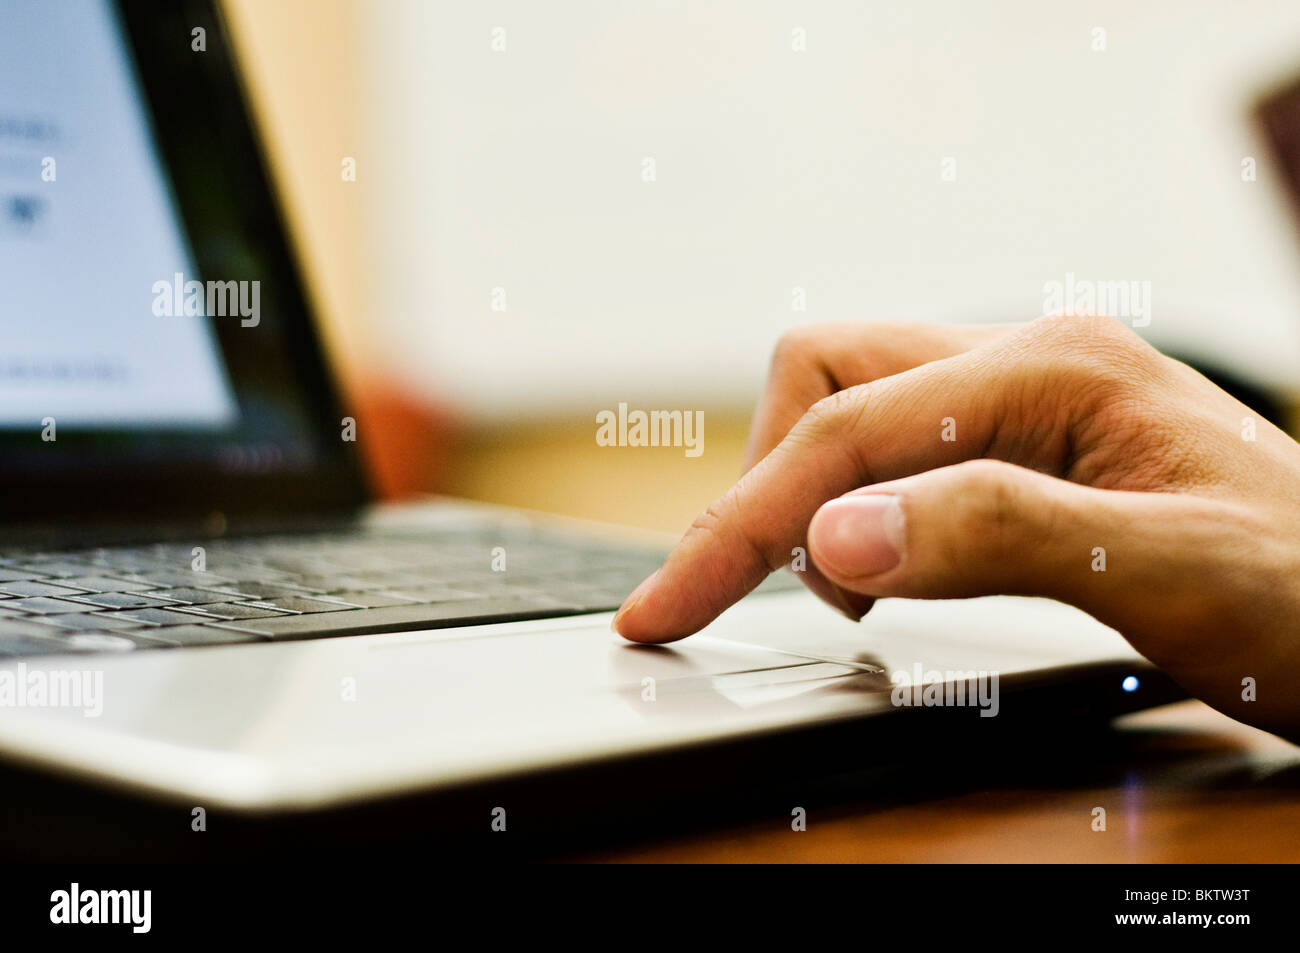 Student's finger on trackpad of wi-fi laptop computer. Stock Photo